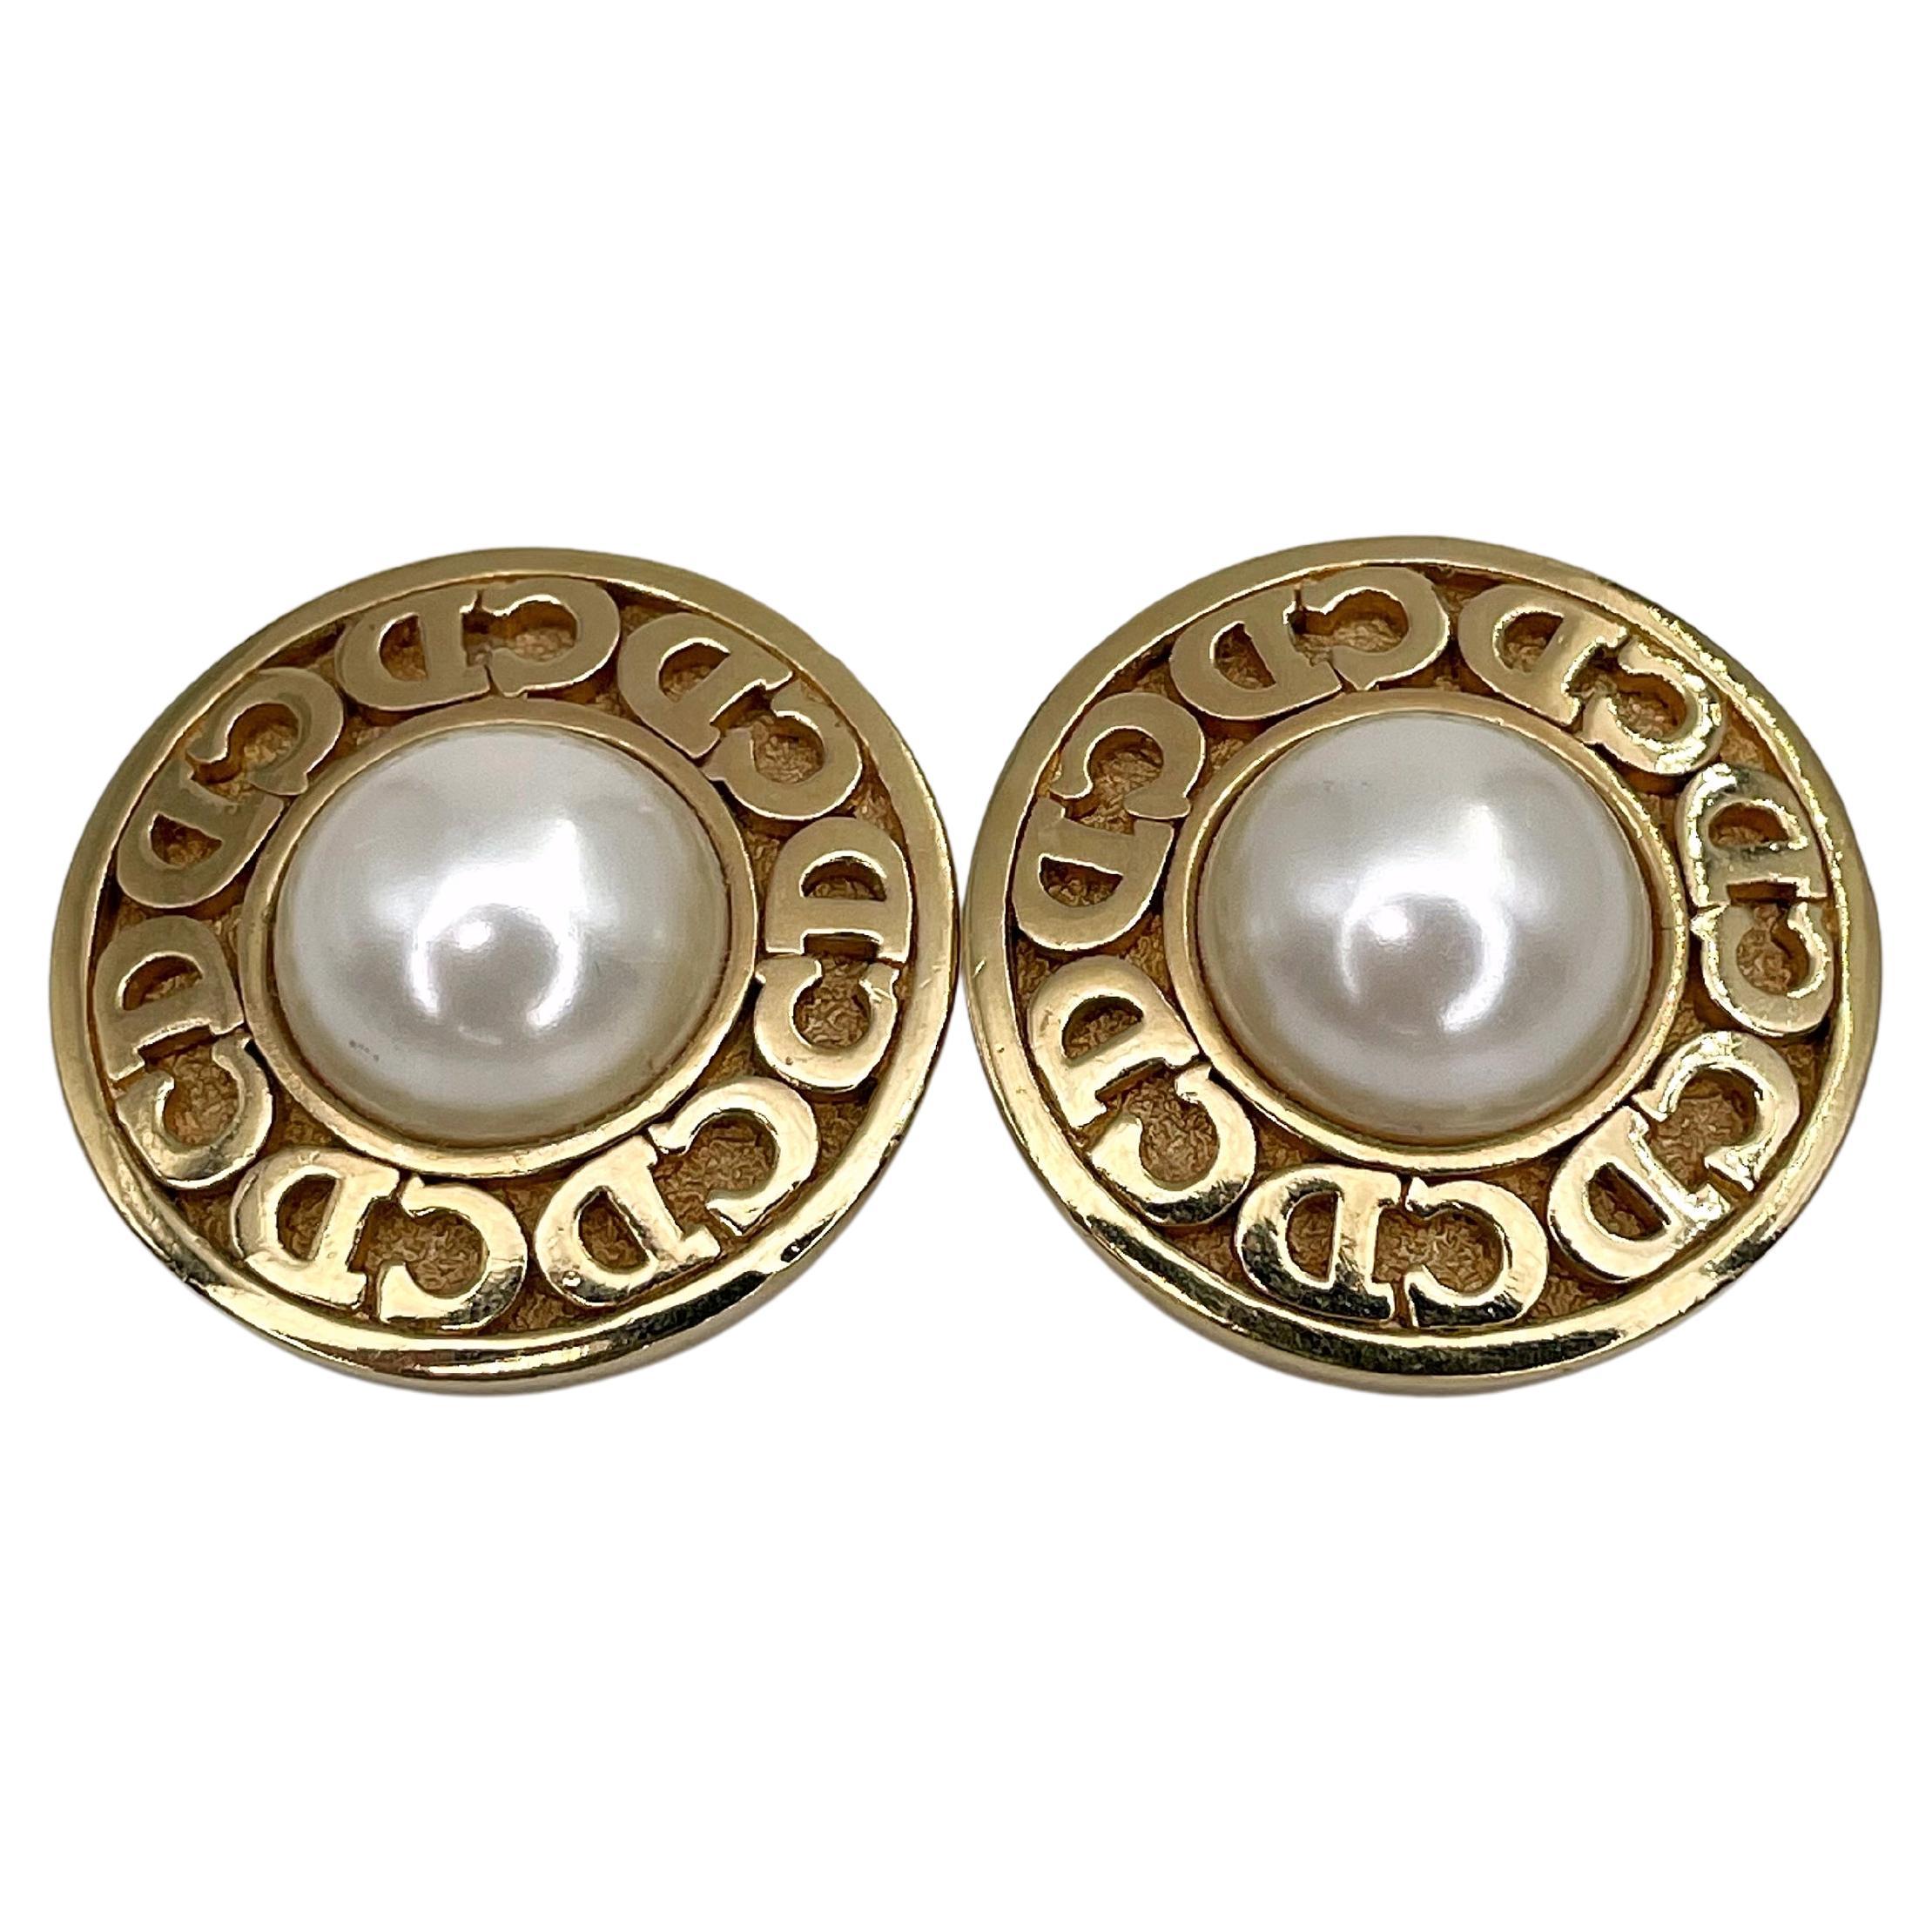 1980s Vintage Christian Dior Gold Tone Faux Pearl CD Logo Round Clip On Earrings